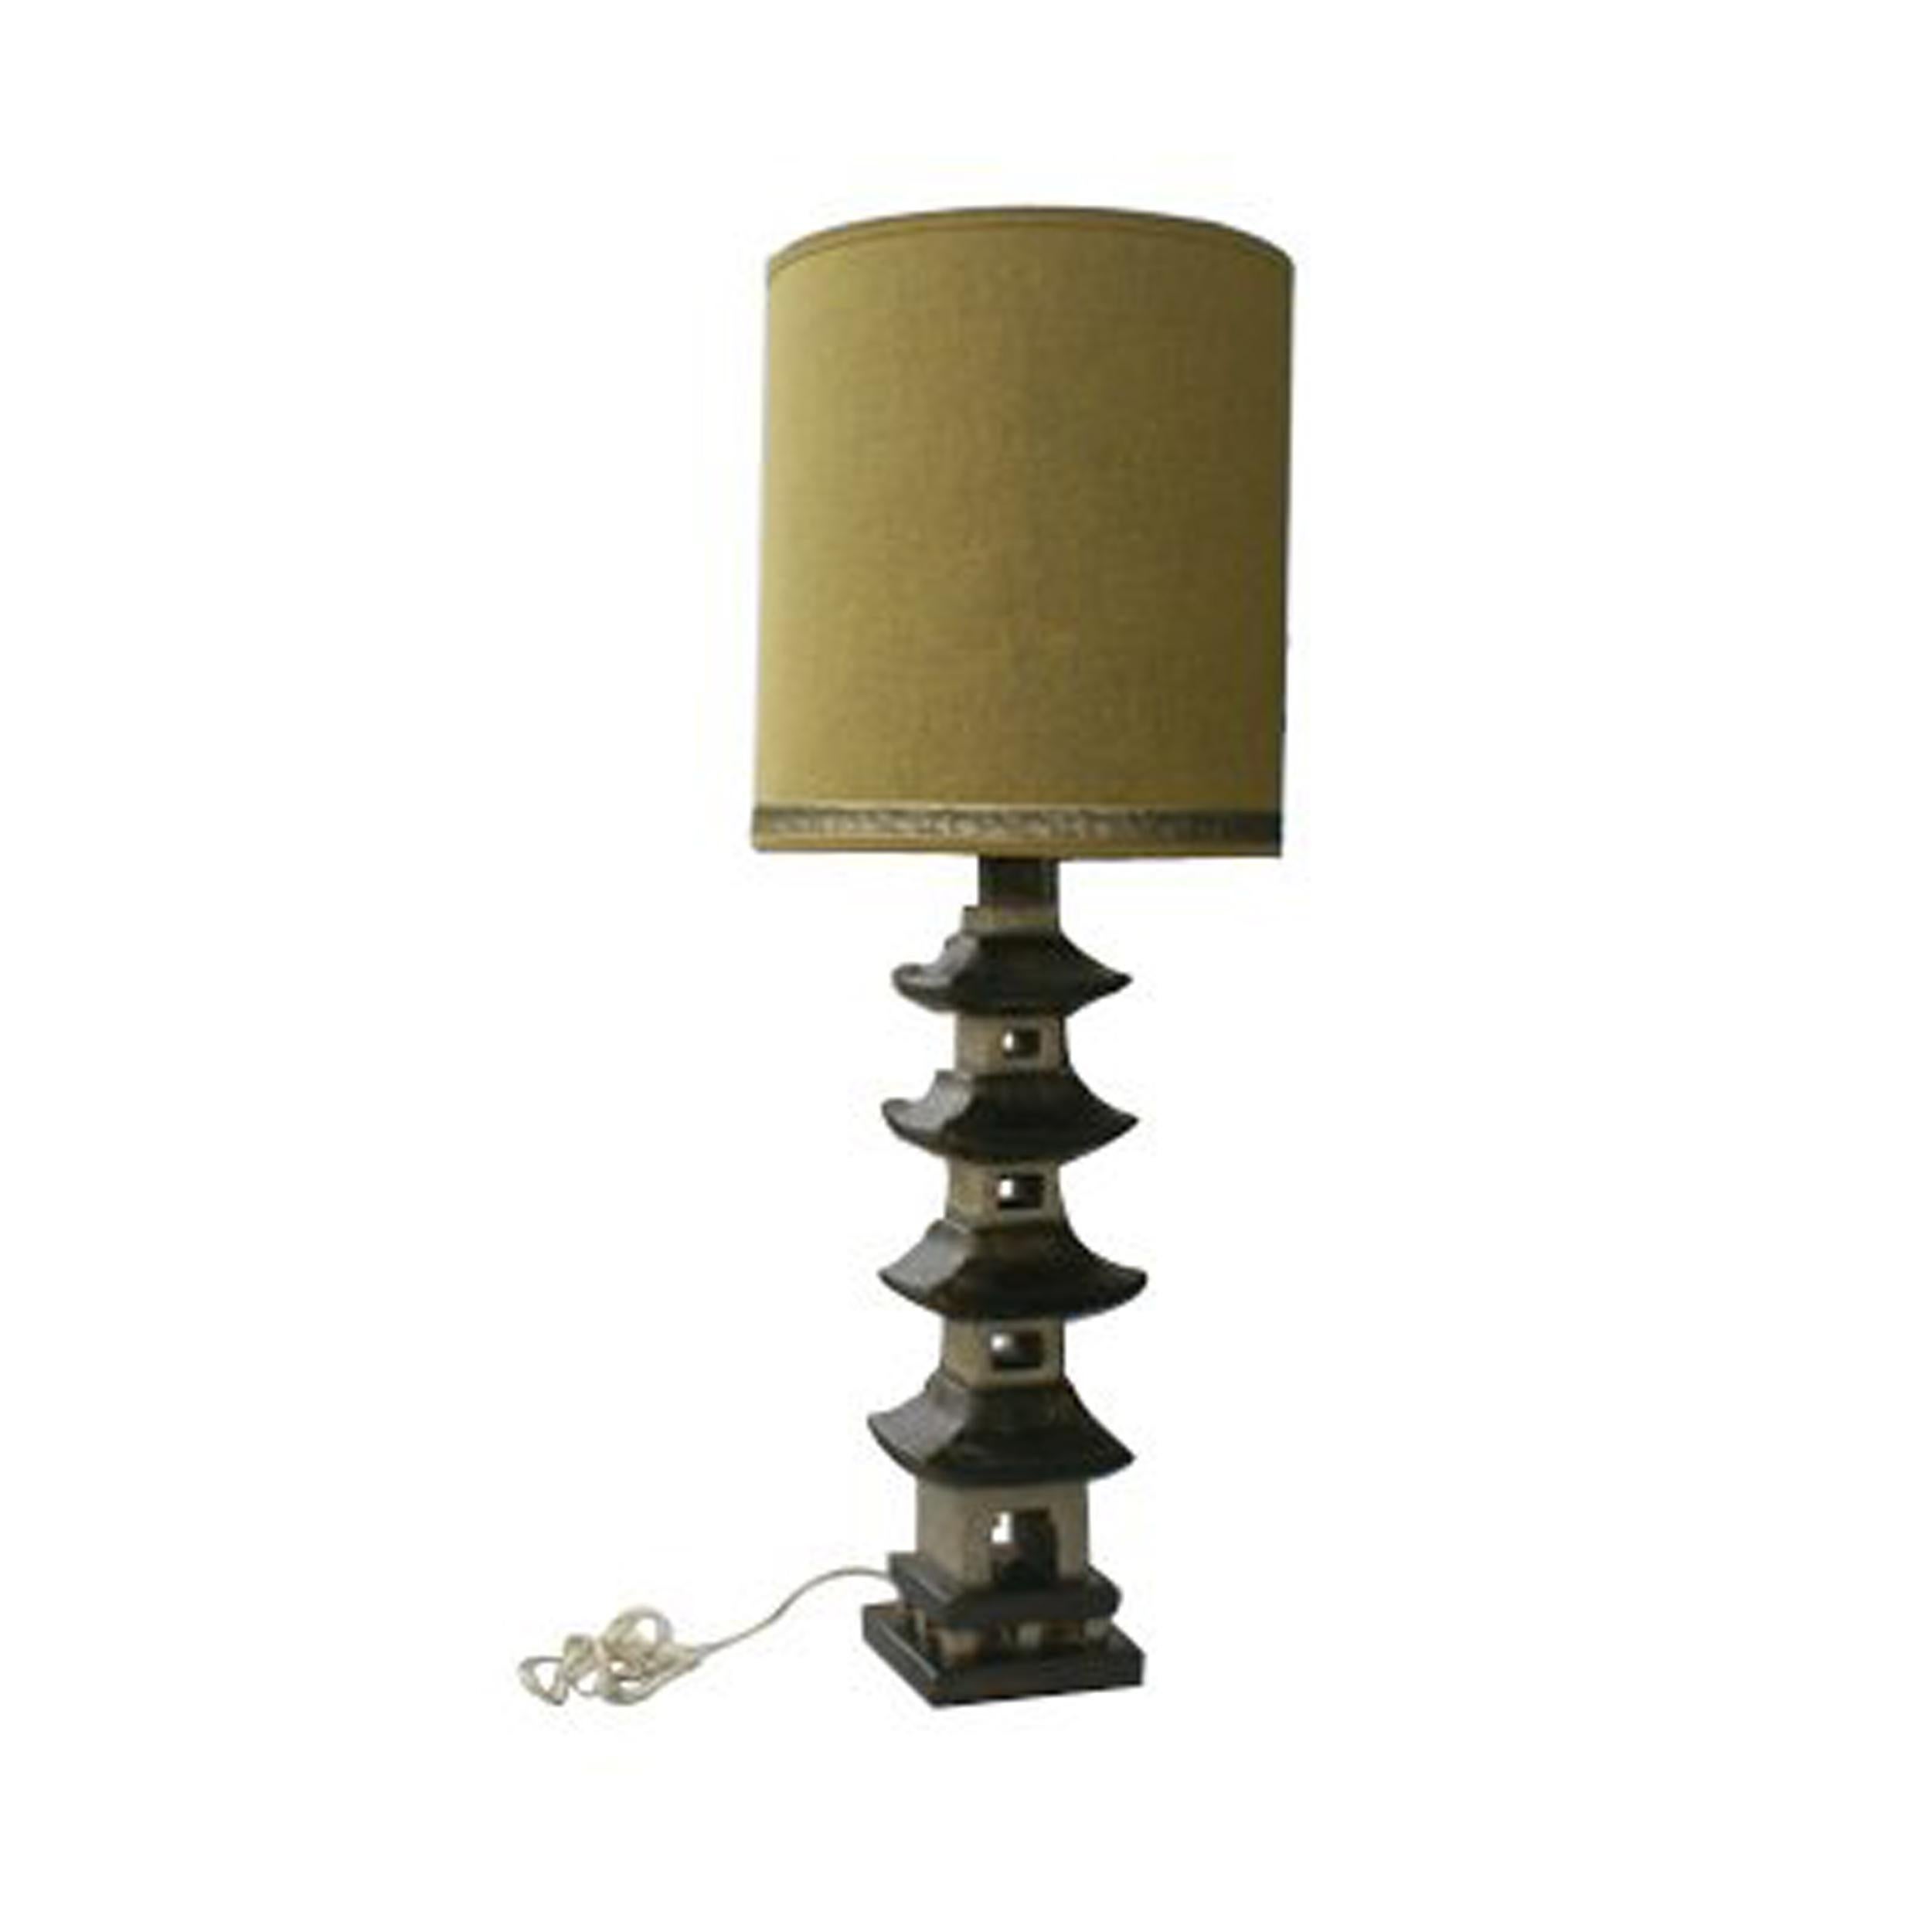 Mid century pagoda lamp


Five story ceramic pagoda
Hand painted with silk blend shade
Measures: Width 16